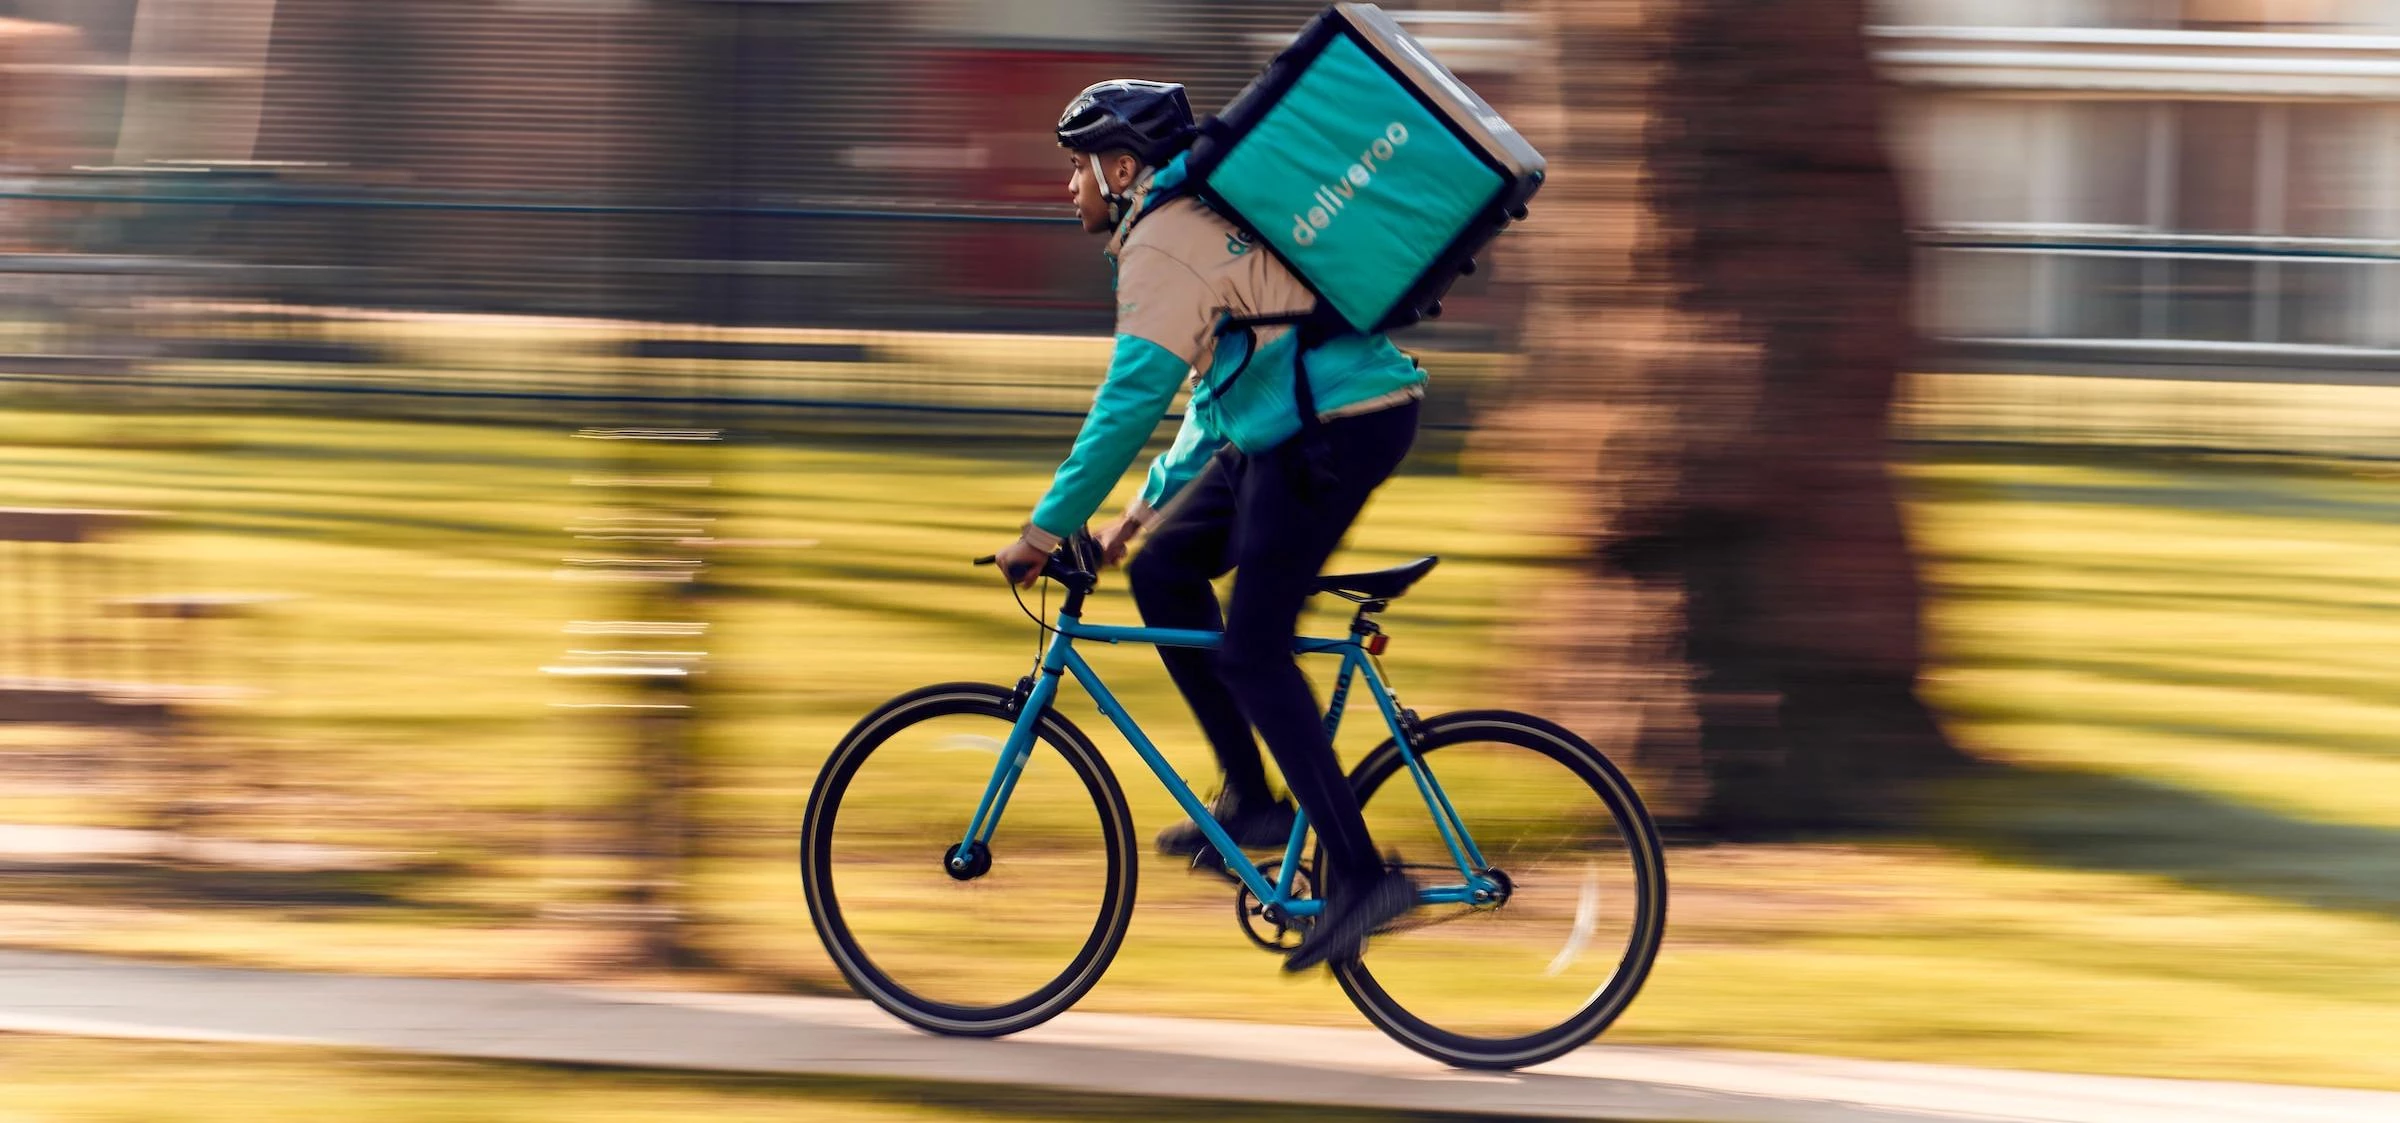 Deliveroo is now available in 100 UK towns and cities